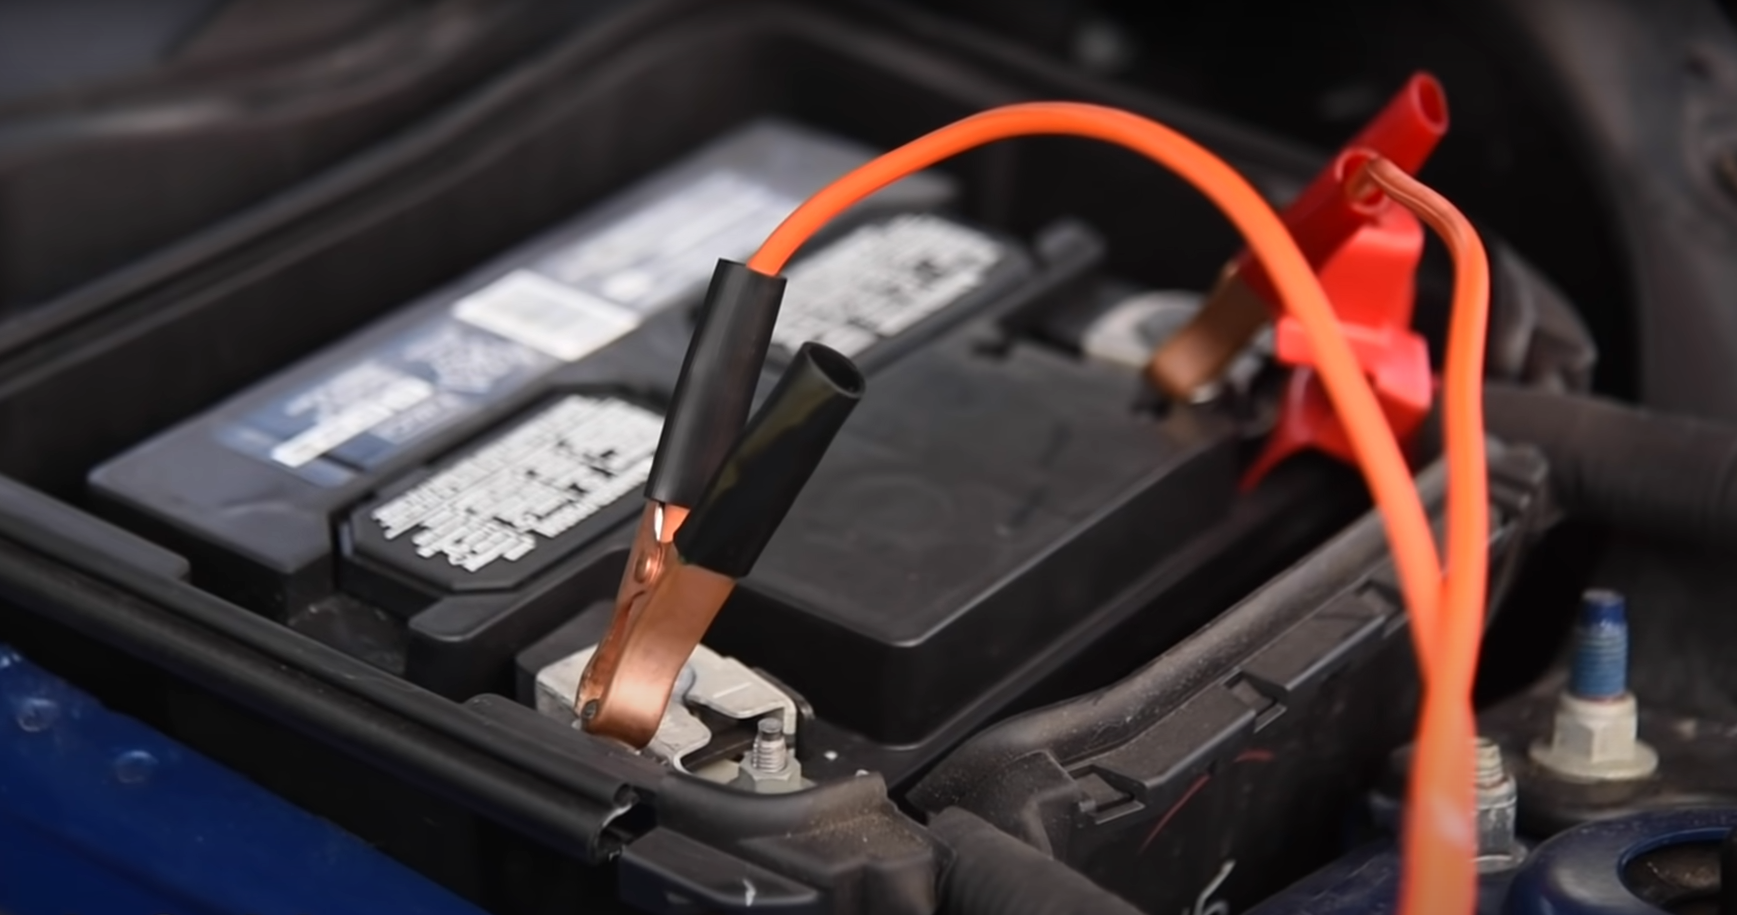 Car Stranded With A Dead Battery? Call Essex MD's Top Towing & Winch Out Experts